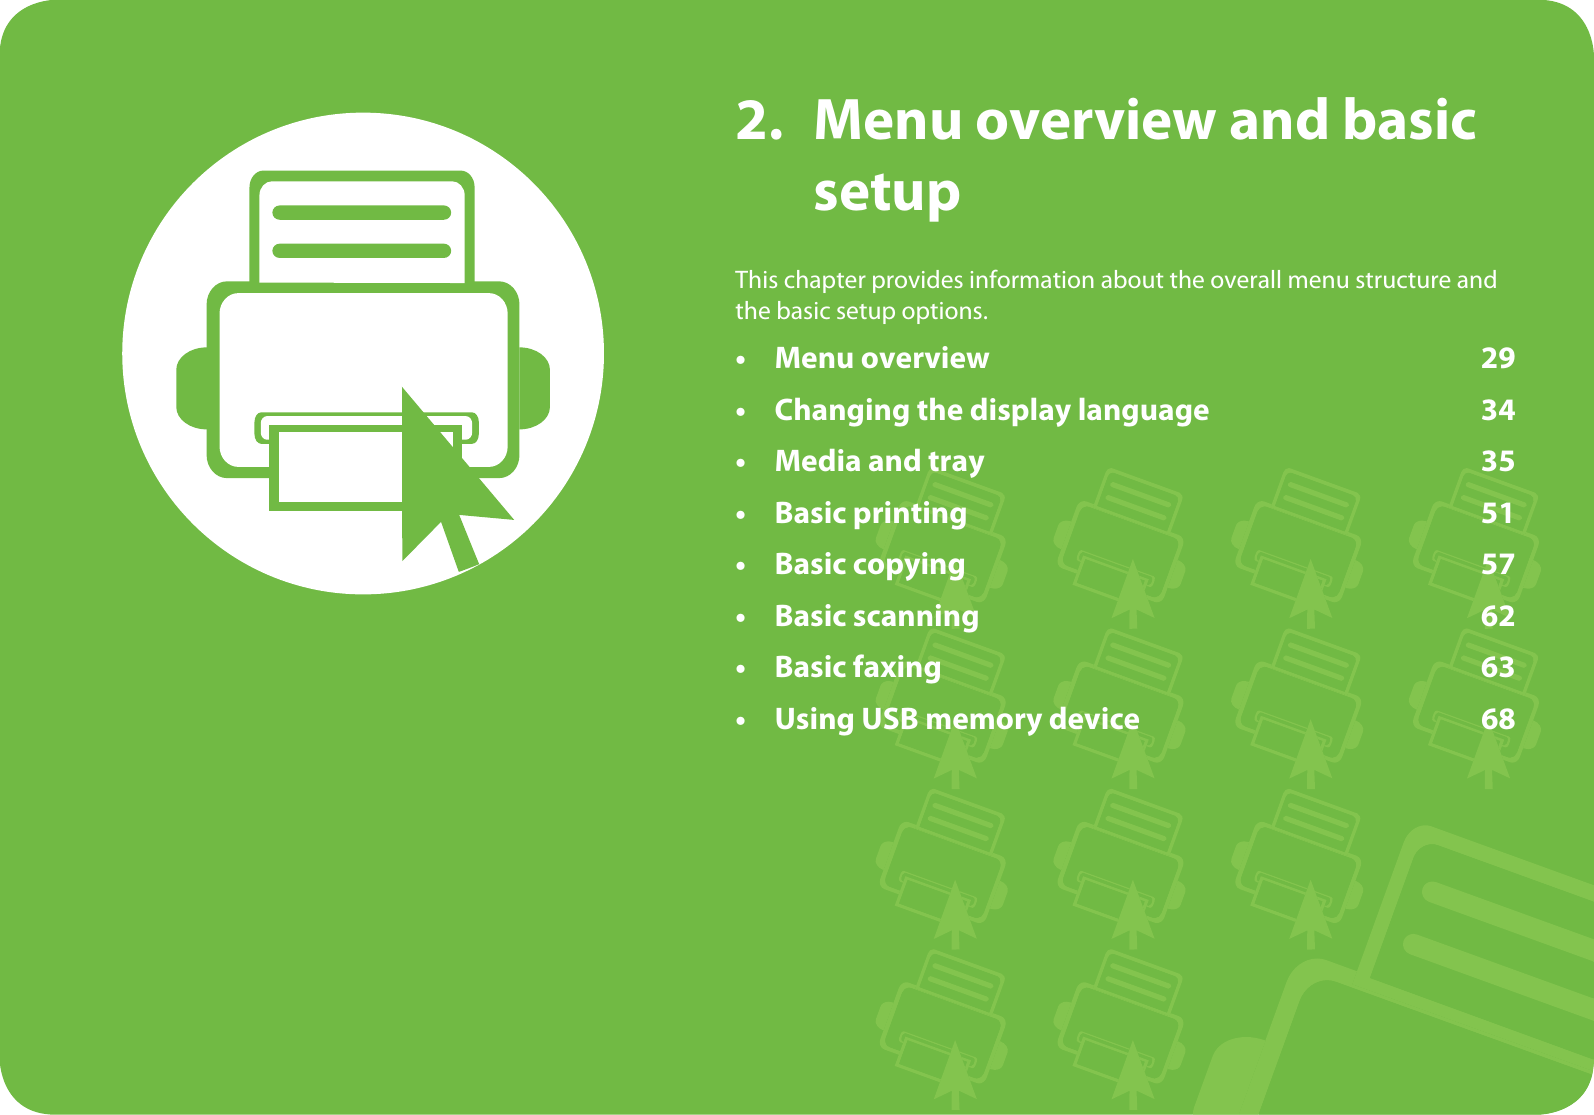 2. Menu overview and basic setupThis chapter provides information about the overall menu structure and the basic setup options.• Menu overview 29• Changing the display language 34• Media and tray 35• Basic printing 51• Basic copying 57• Basic scanning 62• Basic faxing 63• Using USB memory device 68